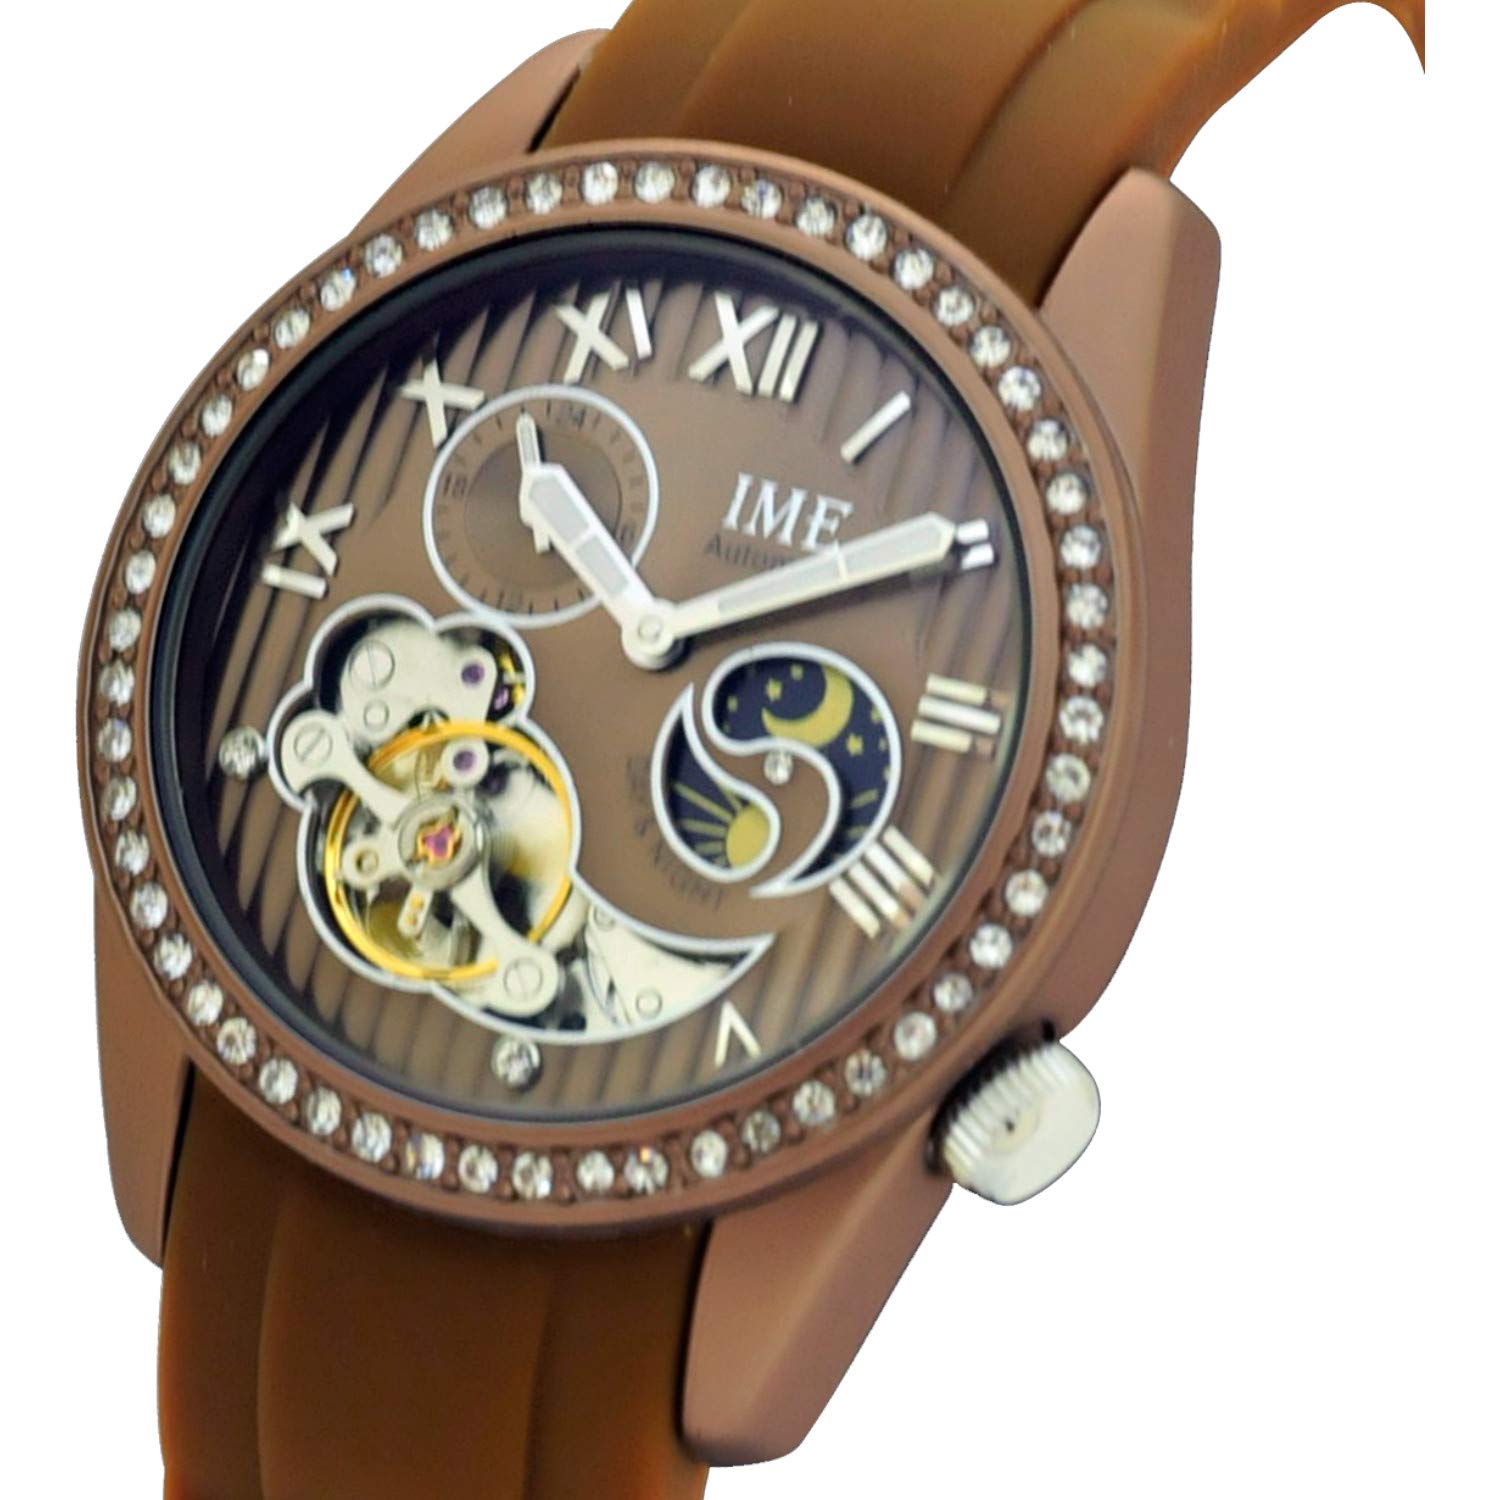 IME Ladies Fashion Automatic Wrist Watch with Alloy Case, Sun & Moon Phase and 24 Hours Display, Czech Stone Show on The Case